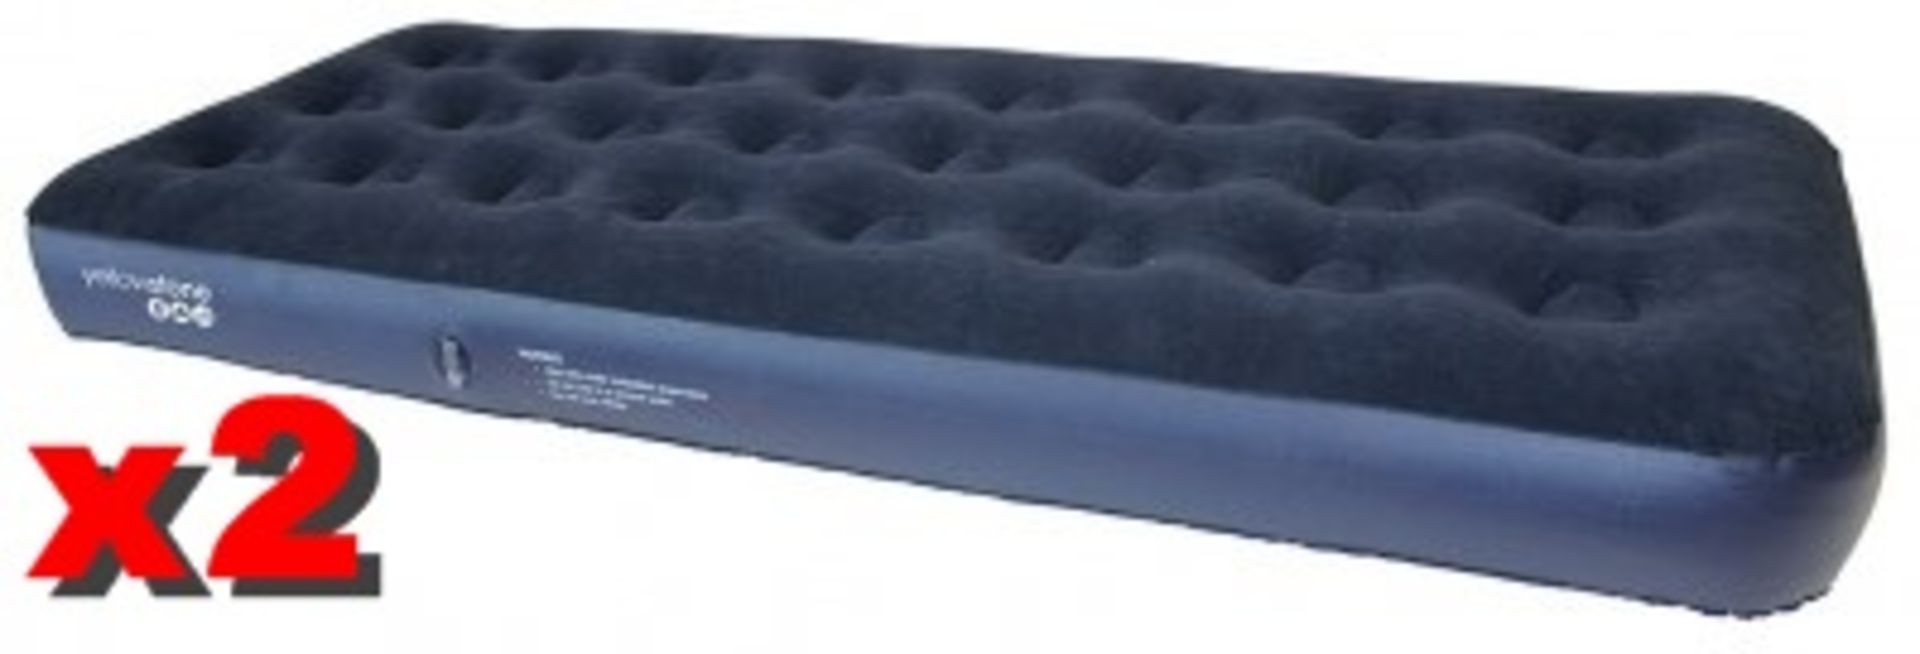 2 x Yellowstone Deluxe Single Flocked Airbeds - Both Blue - Brand New & Boxed  -  Ref: JIM022 - - Image 3 of 3